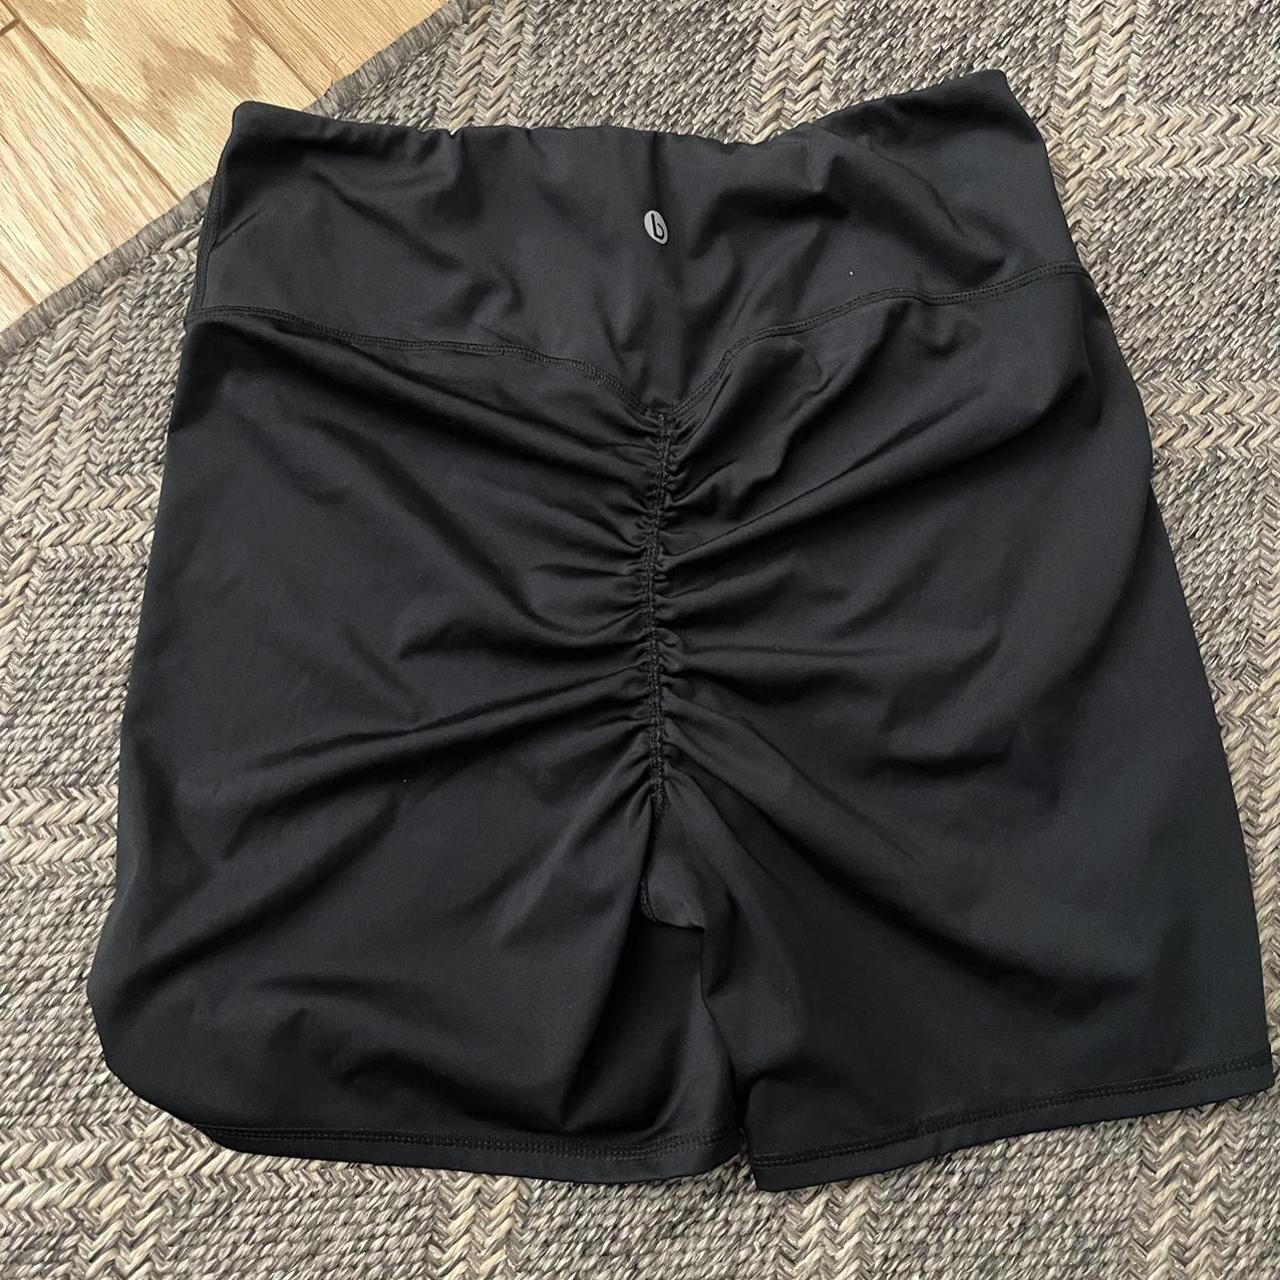 Selling these gym shorts. Size XL - Depop